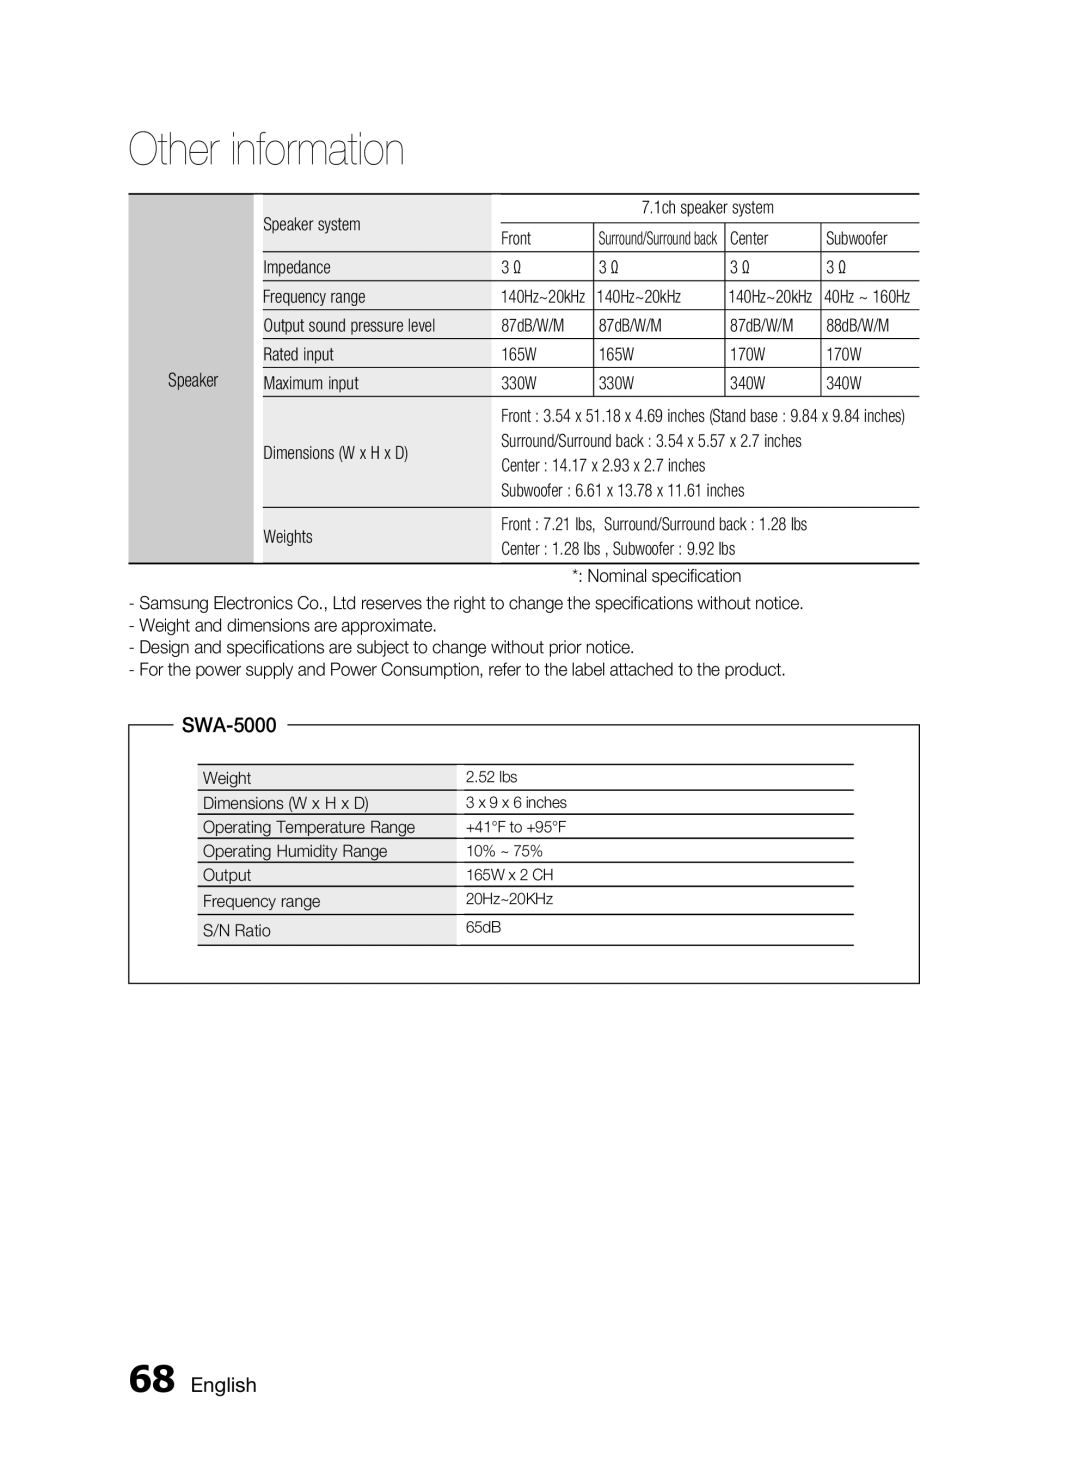 Samsung AH68-02290S, HT-C6730W user manual SWA-5000, English, Other information 